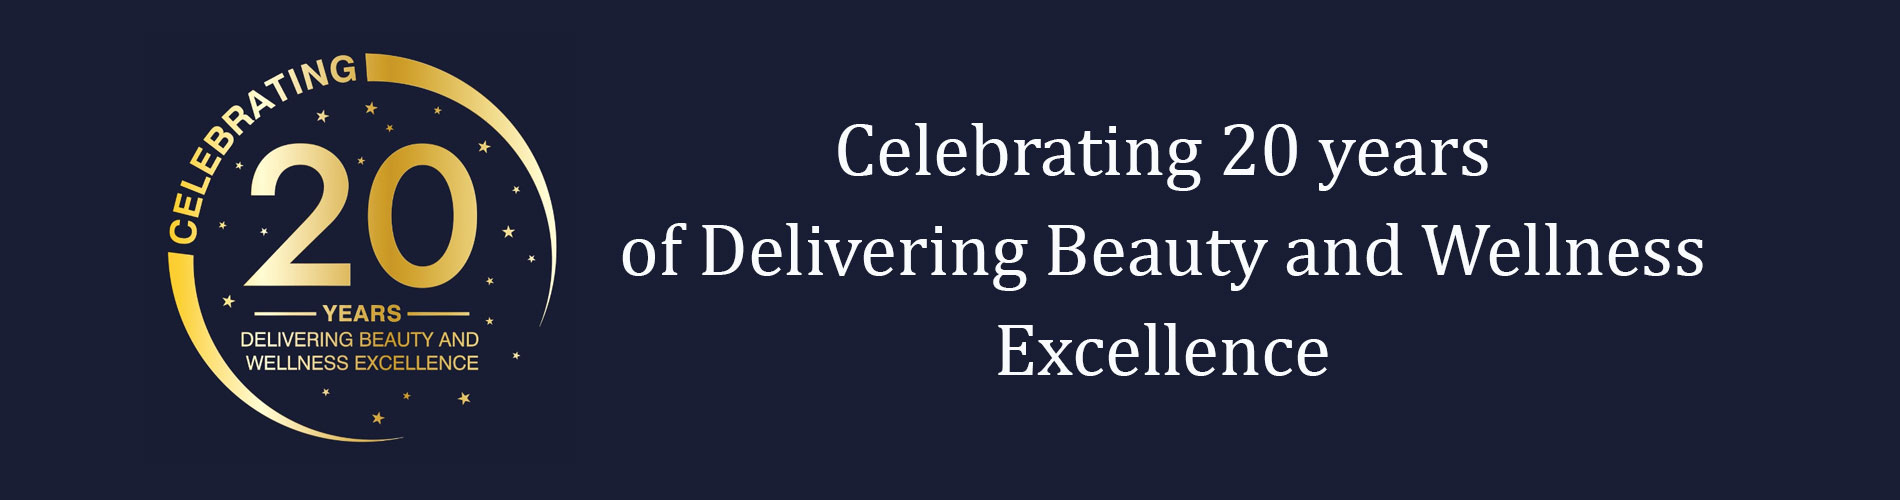 Celebrating 20 Years in Business banner